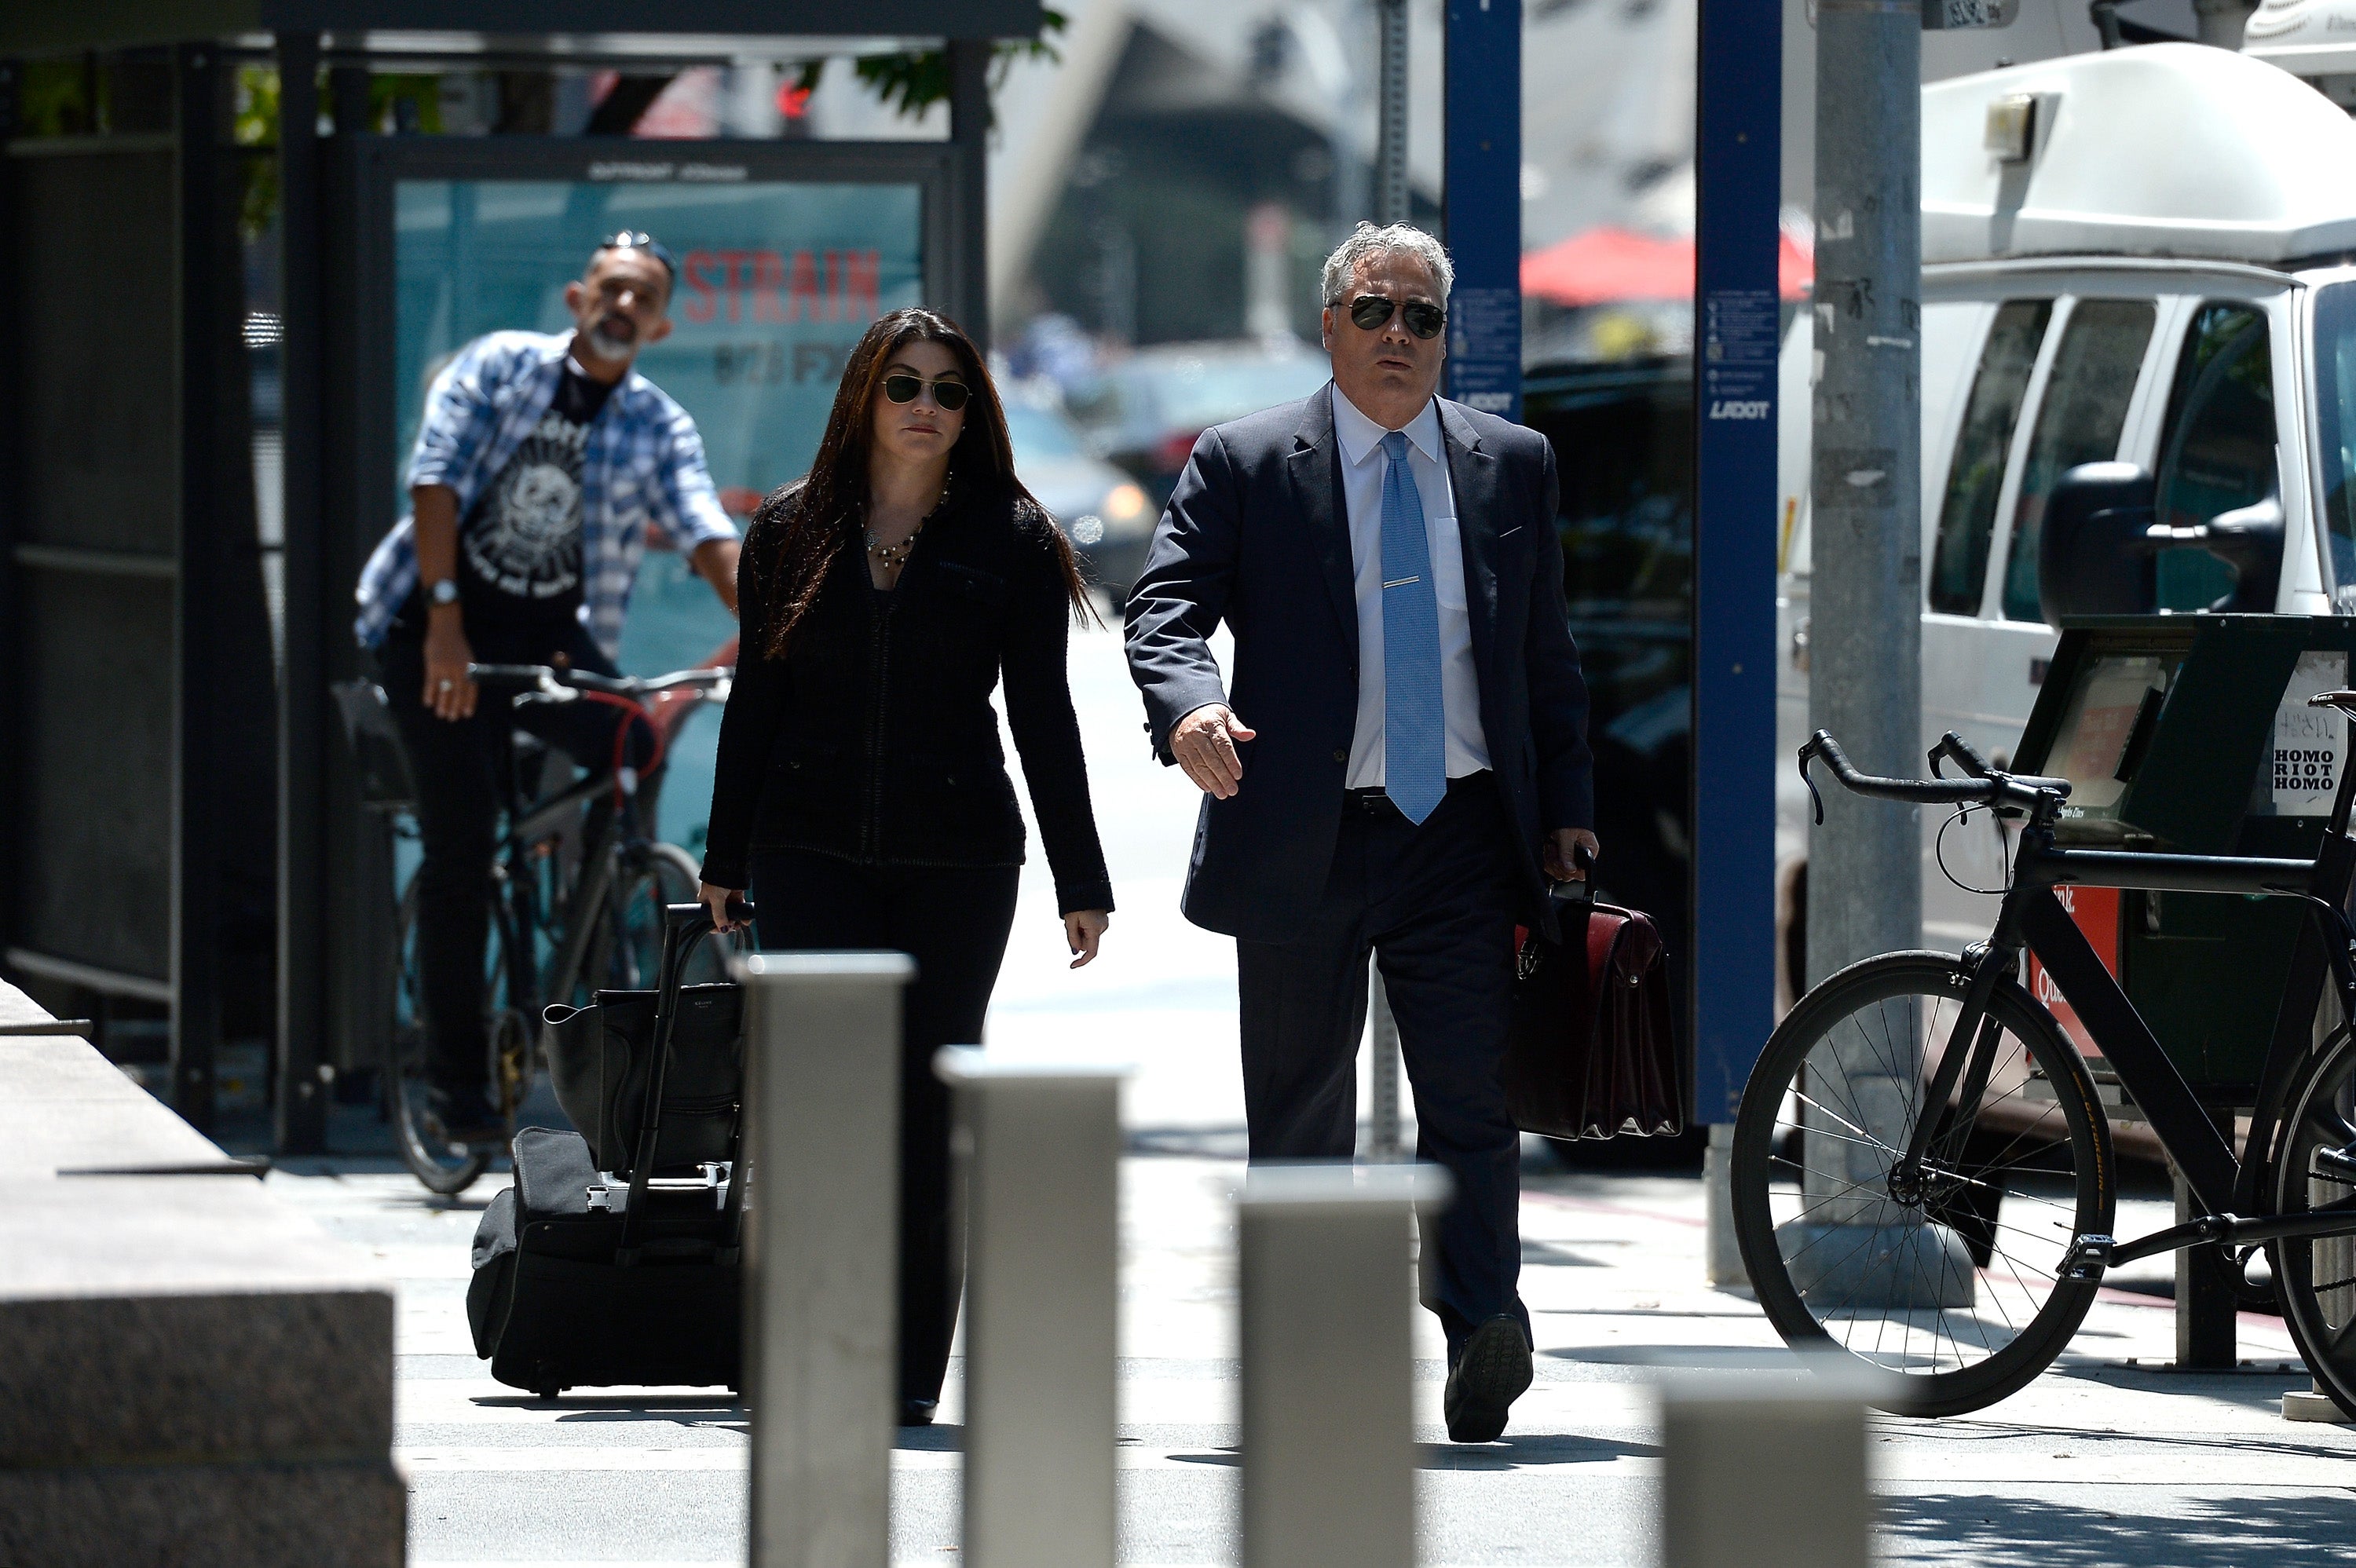 Amber Heard’s lawyer Samantha Spector (left) arrives for a court appearance on 9 August 2016 in Los Angeles